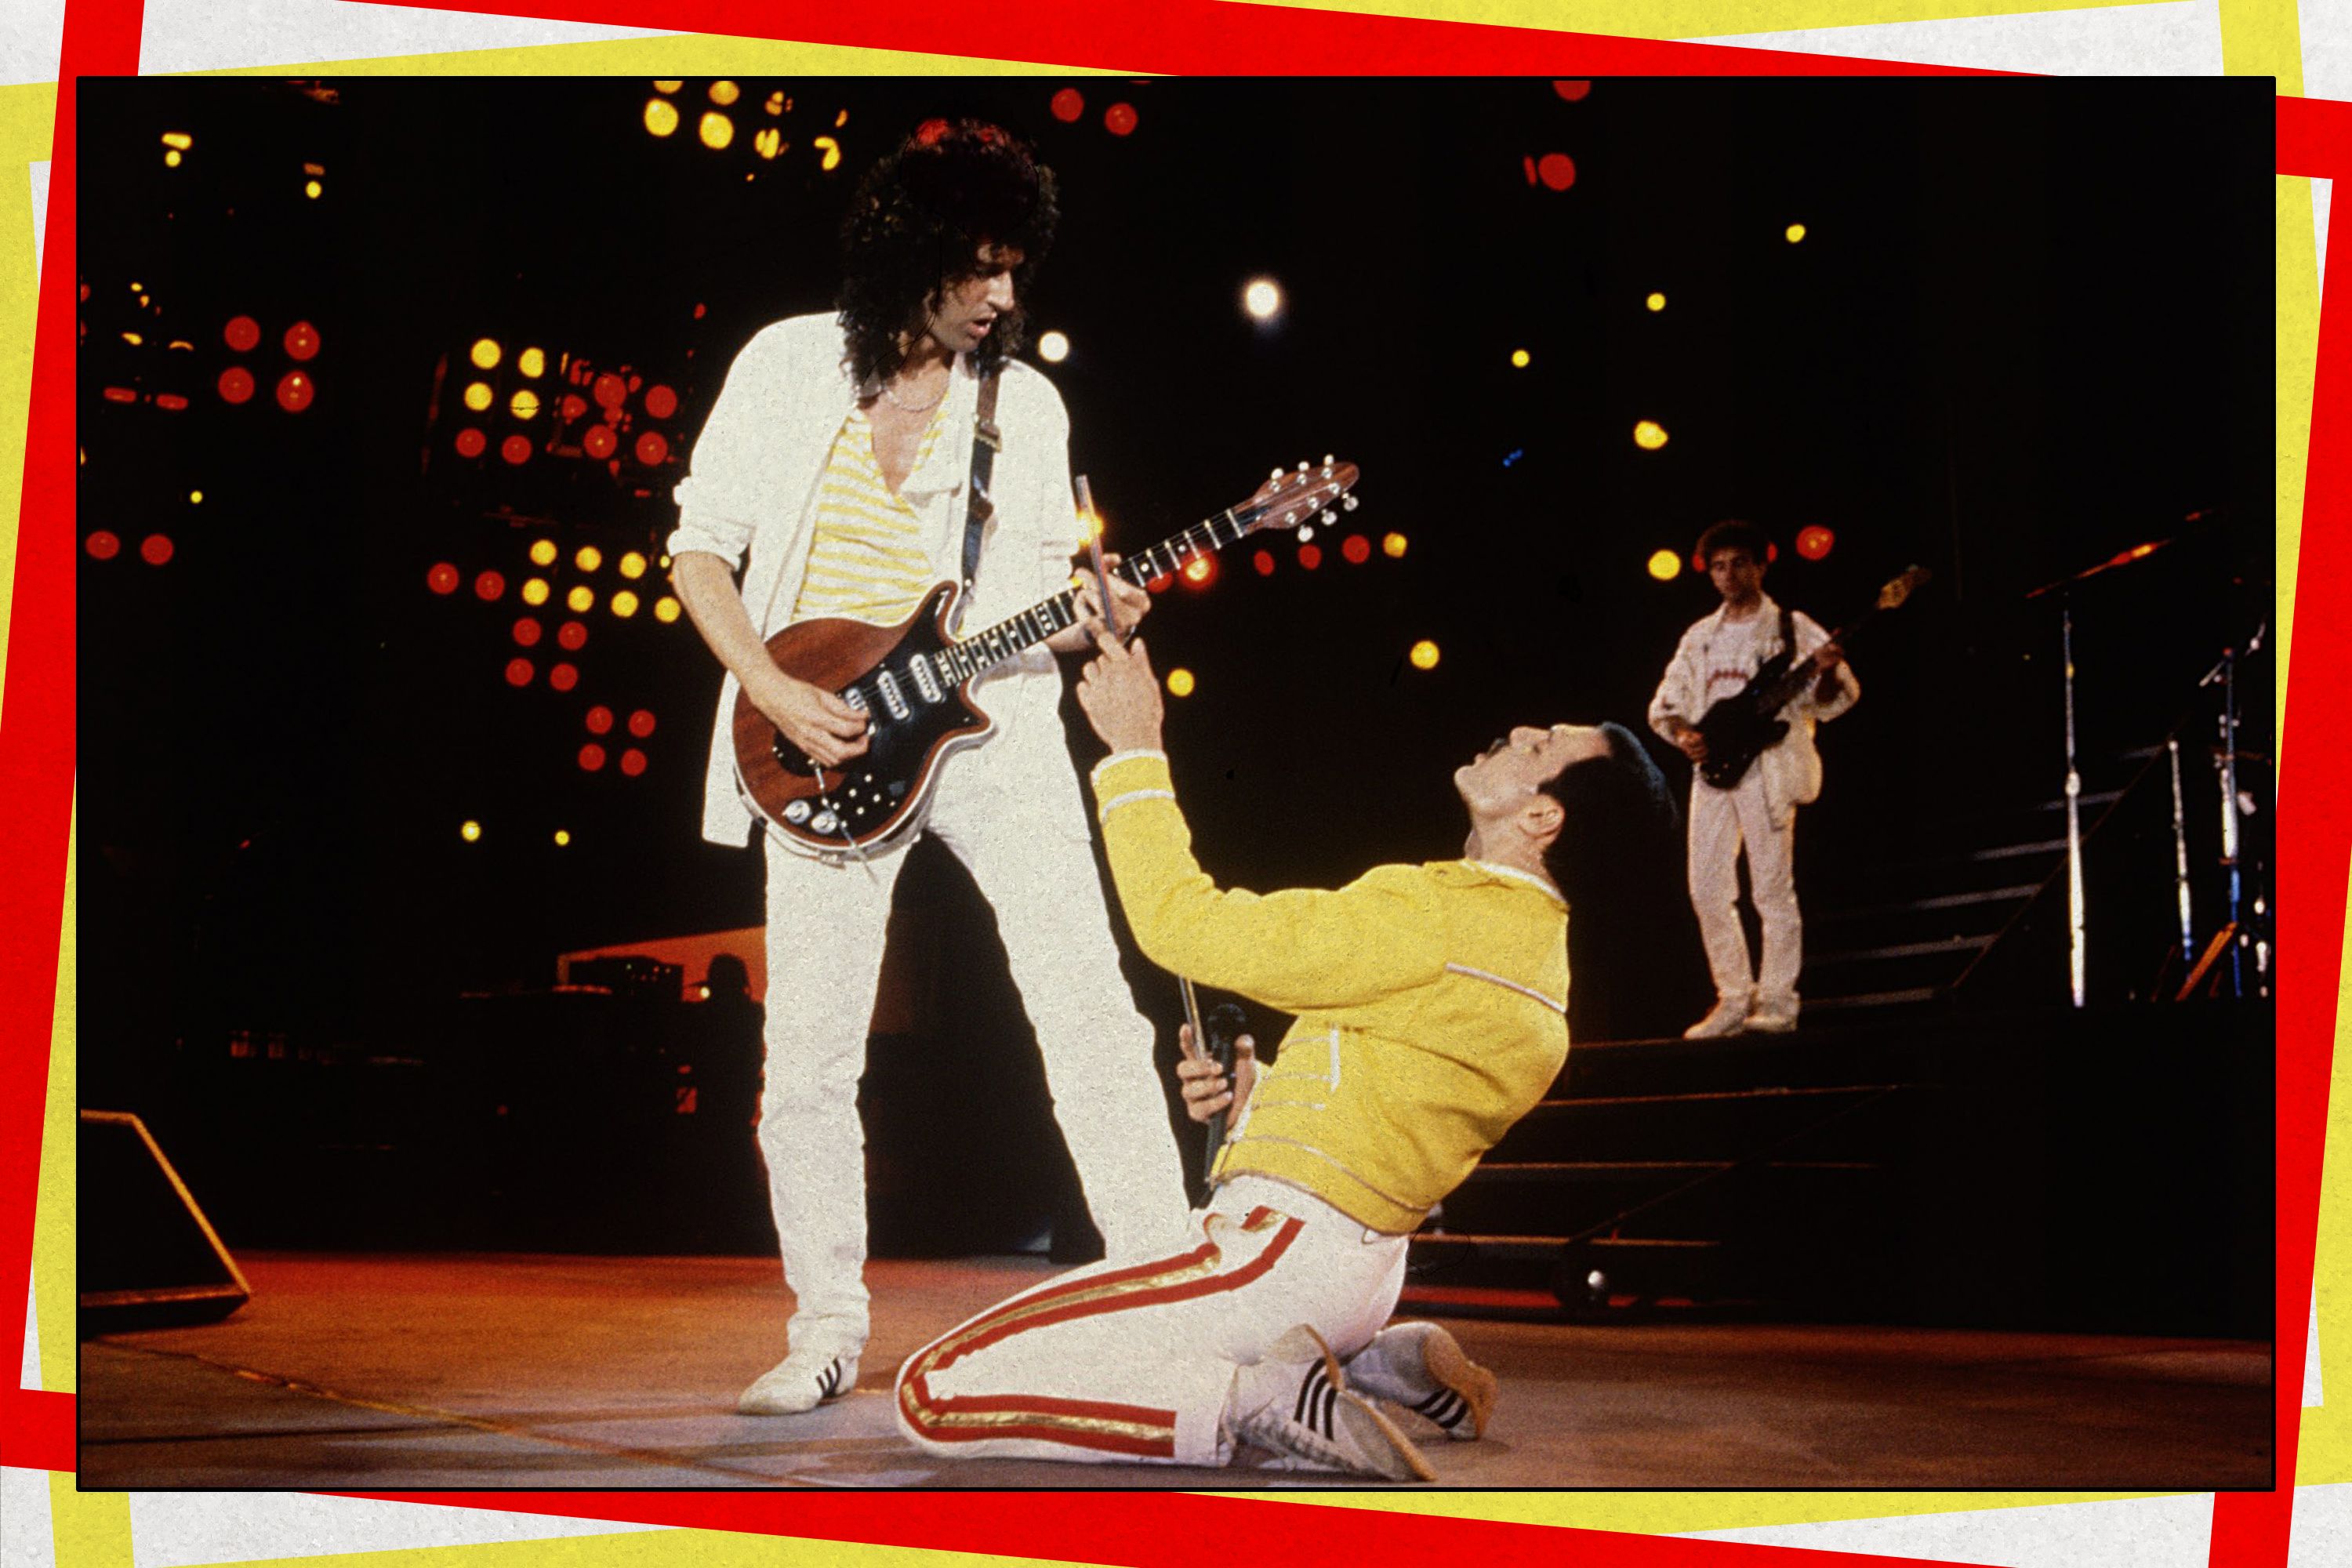 39. lyrics by Brian May, Produced by Queen and Roy